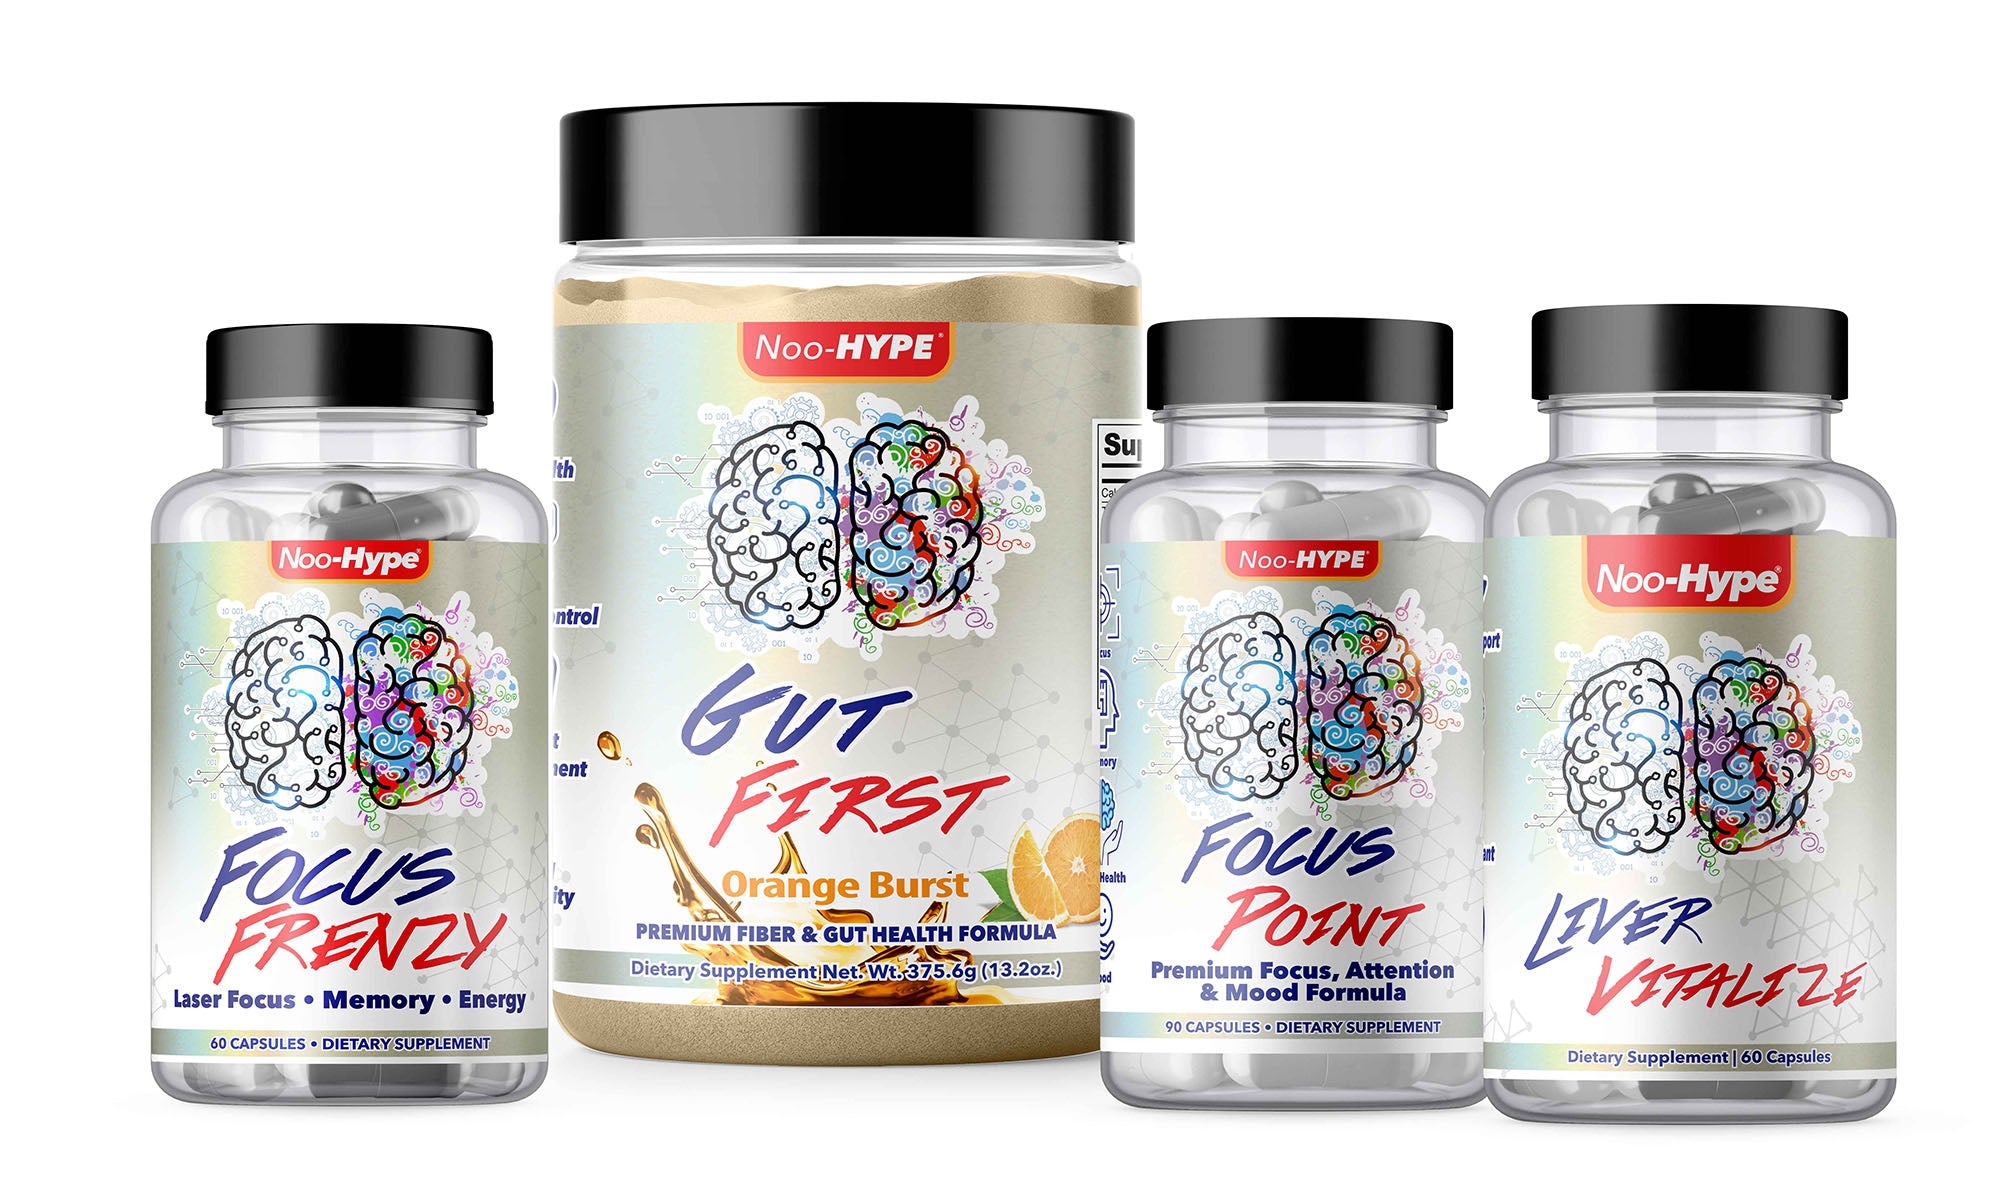 Noo-HYPE Product Stack, 60 capsule Focus Frenzy, 30 Serving Gut First, 90 capsule Focus Point, 60 capsule Liver Vitalize